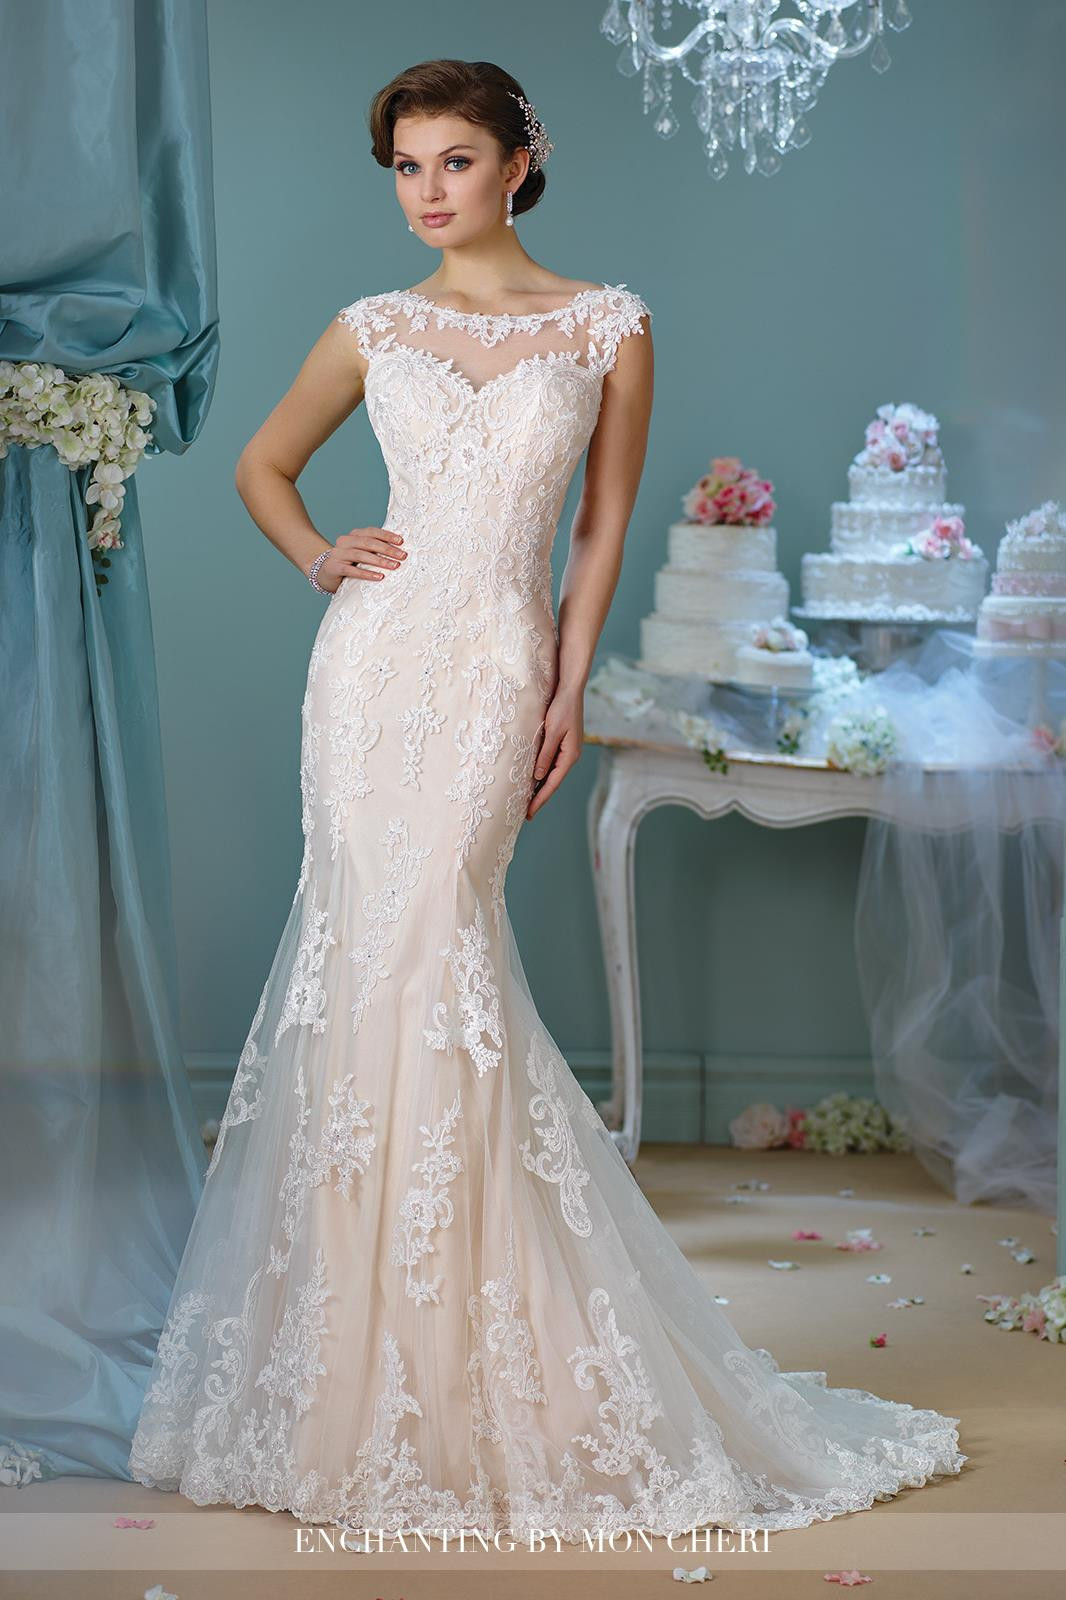 216159 Wedding Dress from Enchanting by Mon Cheri - hitched.co.uk